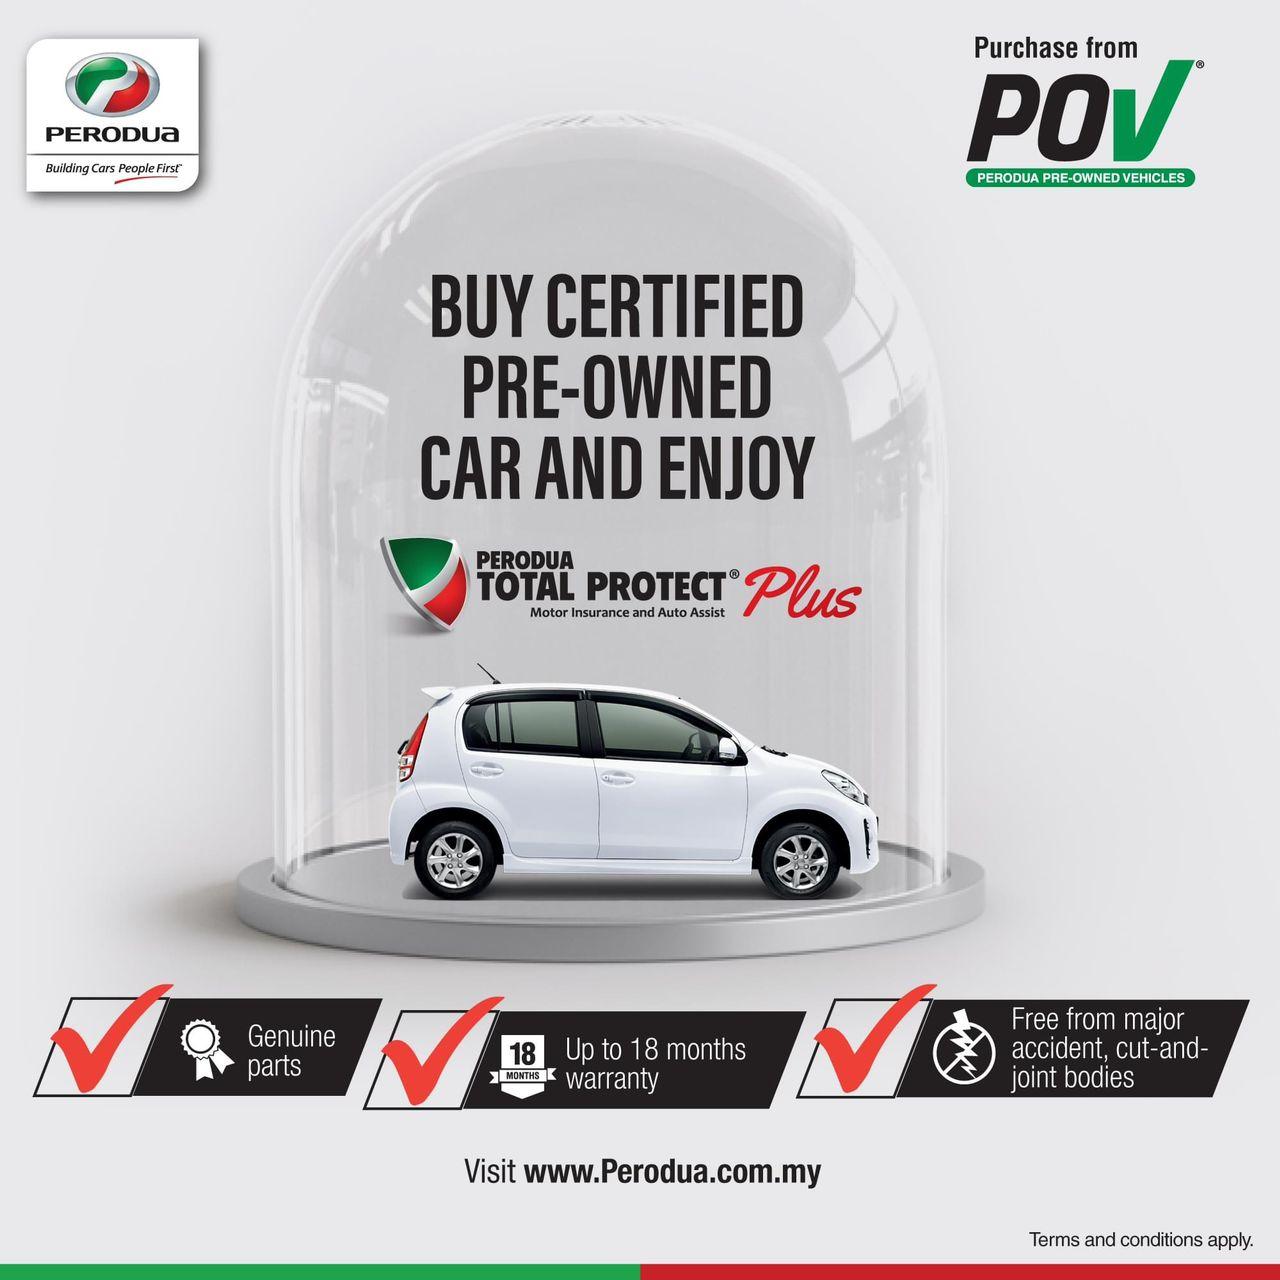 POV - Buy certified pre-owned car and enjoy